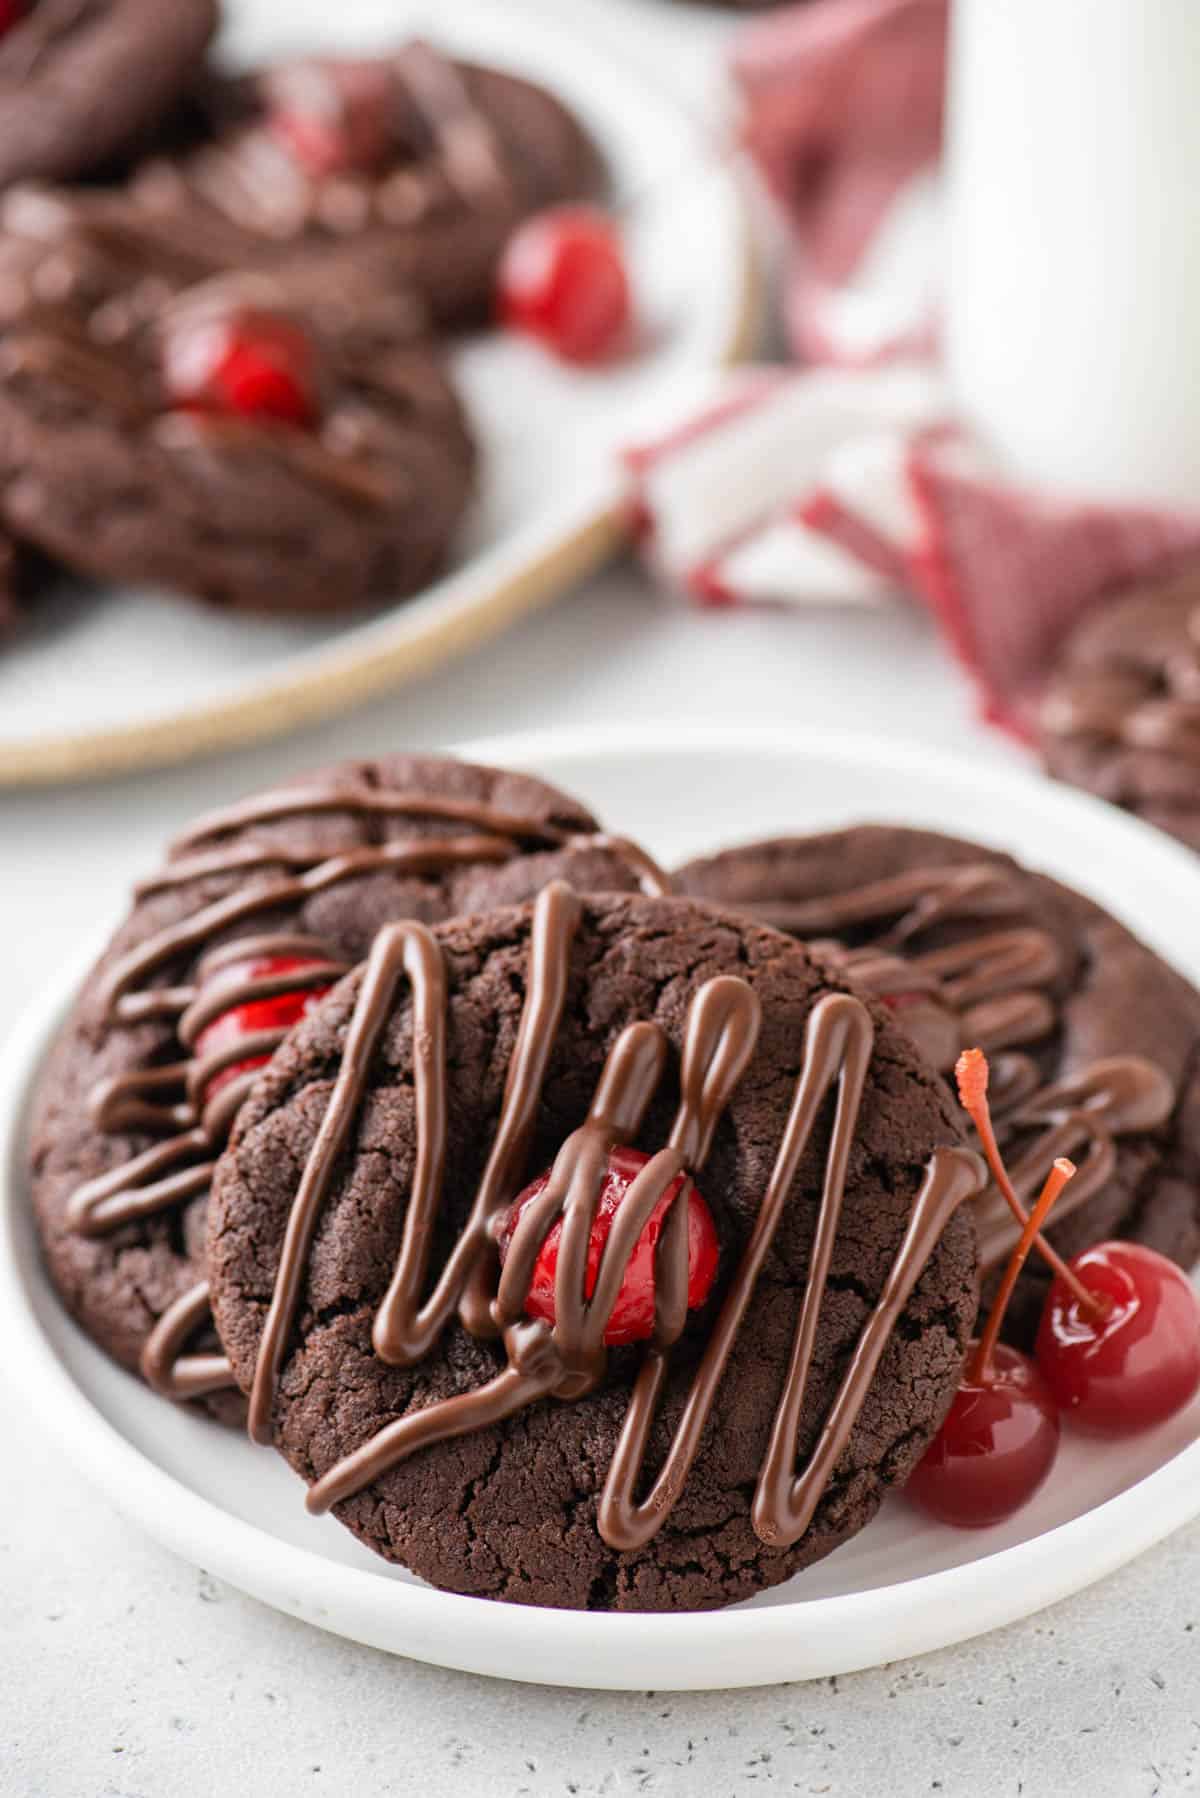 Chocolate cherry cookies on a plate